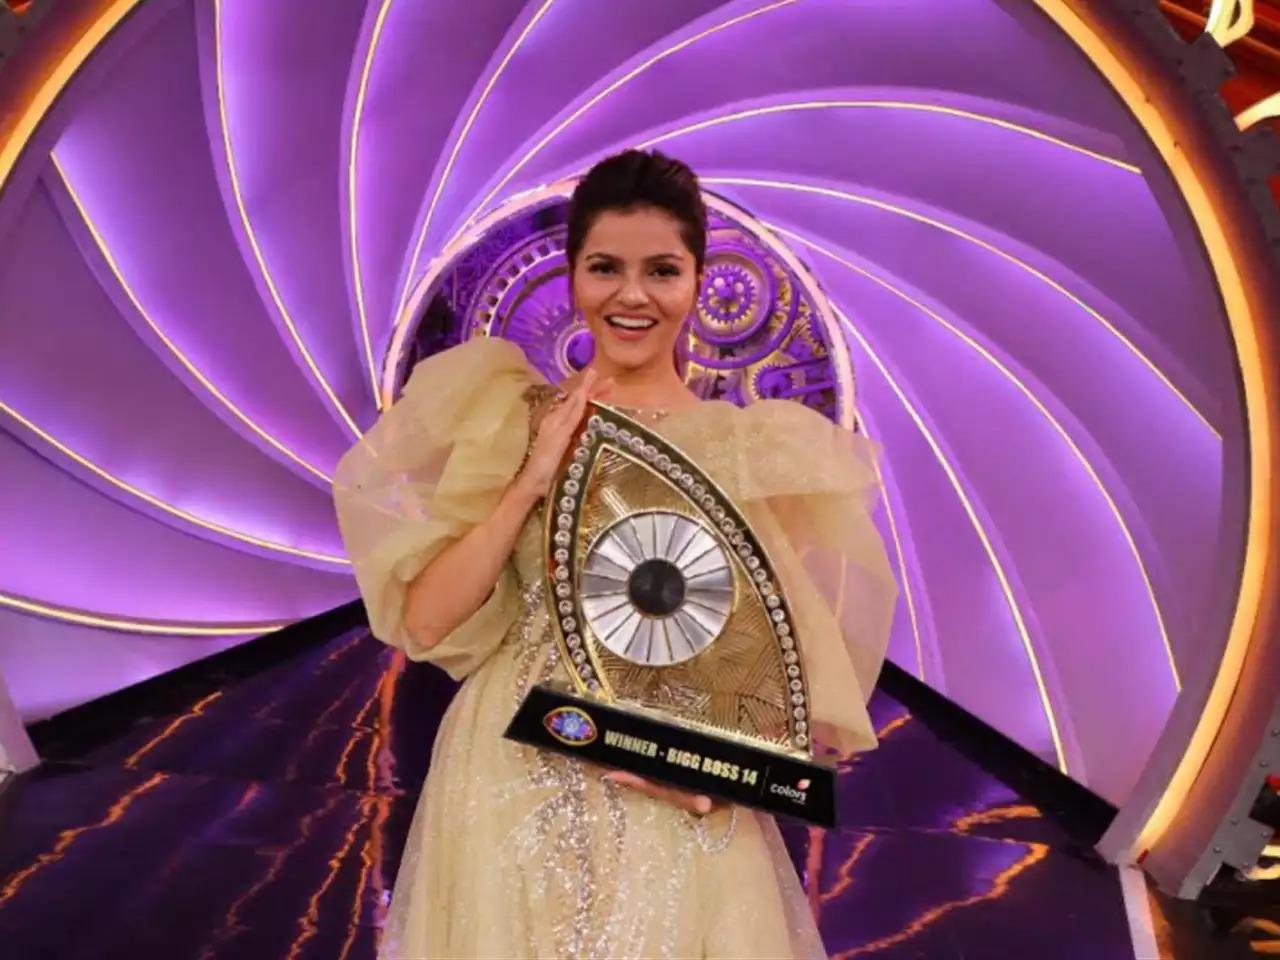 Bigg Boss Season 14 (2020) - Winner: Rubina Dilaik
Rubina Dilaik's outspoken and bold personality was widely loved by the audience. Her determination to play the game made her the winner of the 14th season